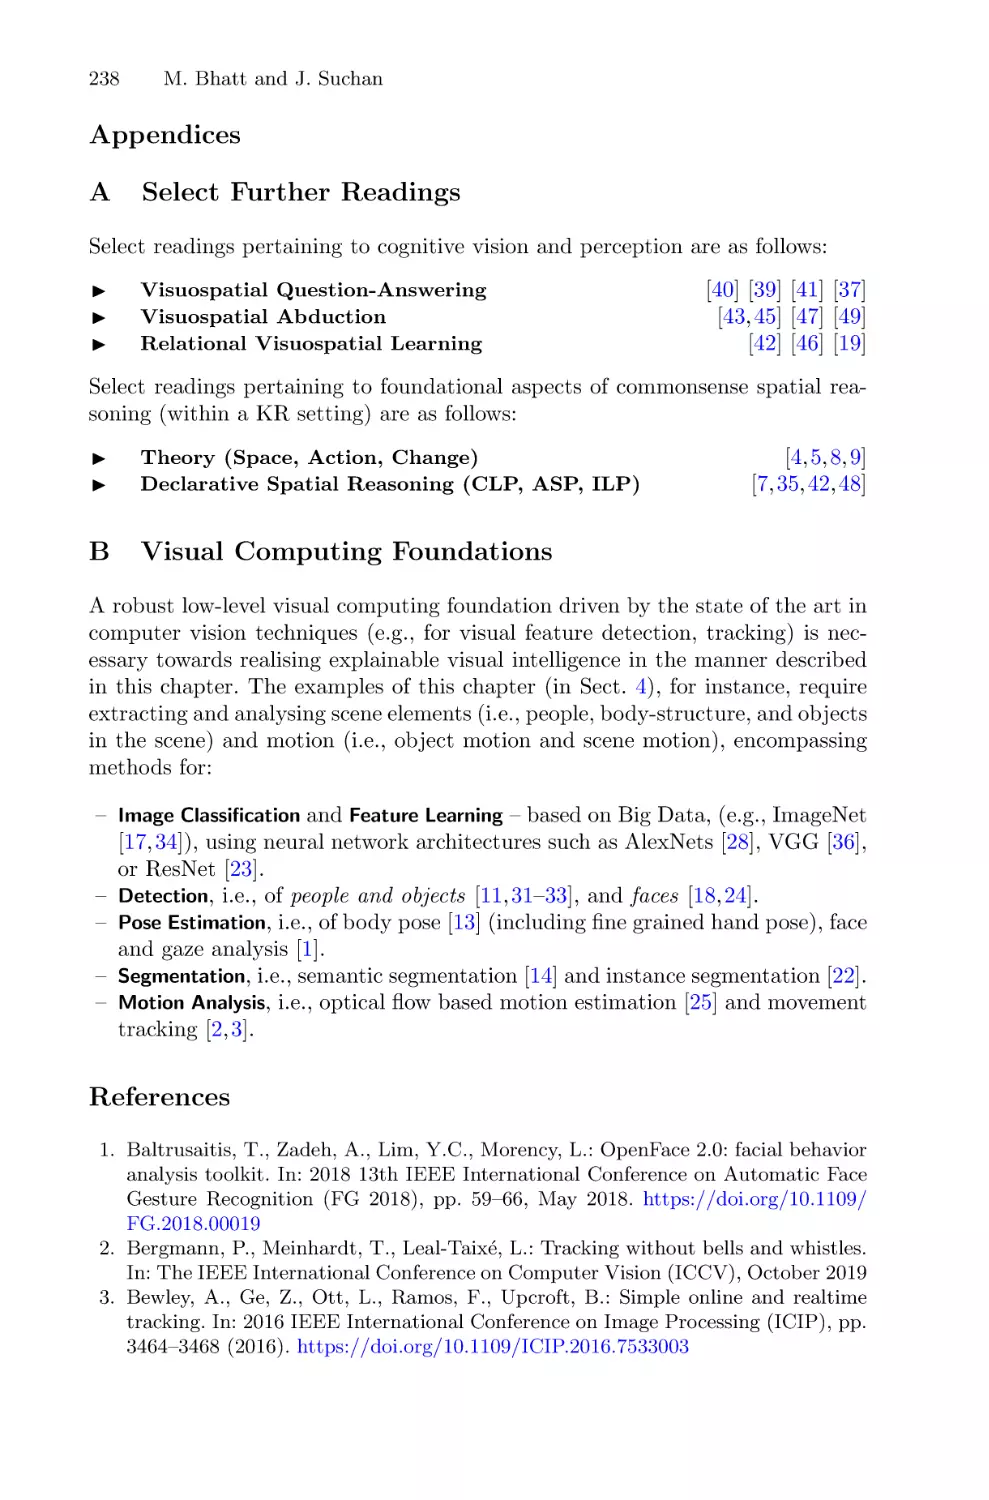 A Select Further Readings
B Visual Computing Foundations
References